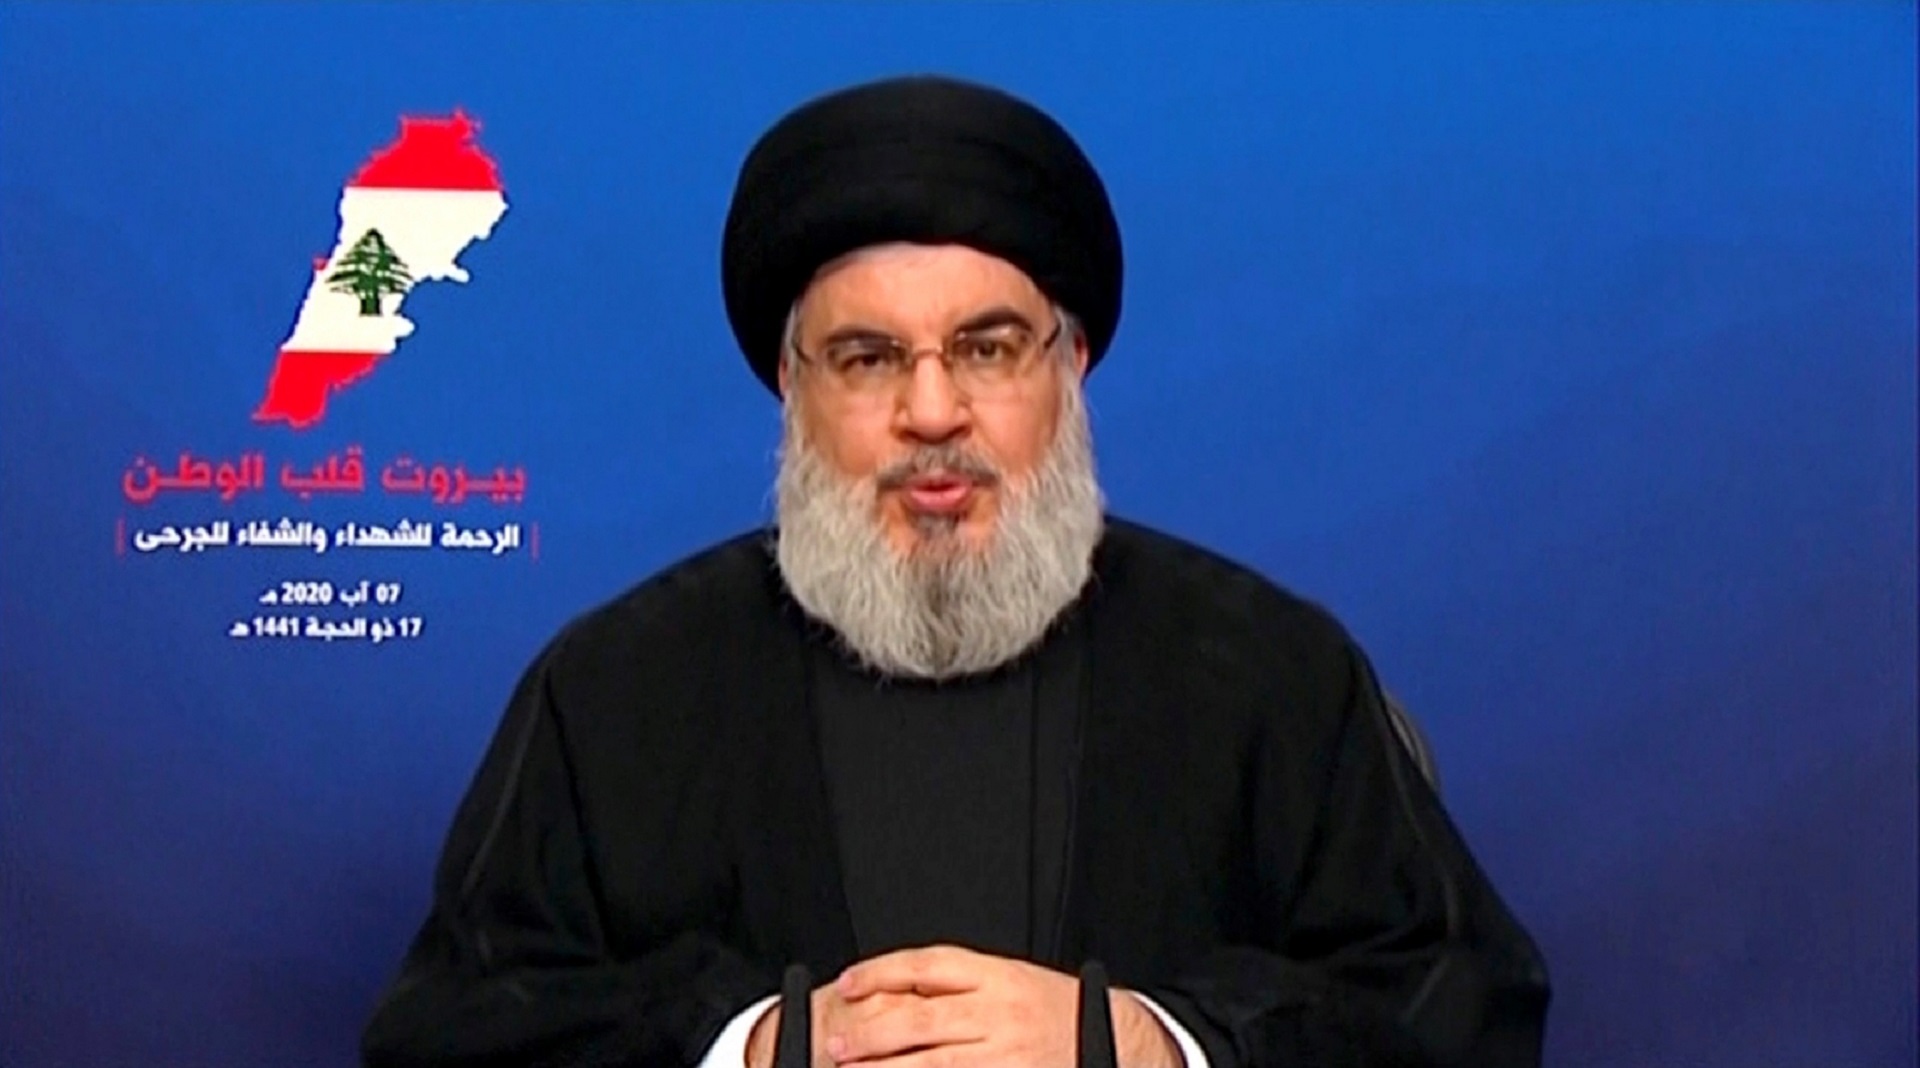 Hezbollah leader Nasrallah gives speech after Beirut blast Hezbollah leader Sayyed Hassan Nasrallah gives a televised speech following Tuesday's blast in Beirut's port area, Lebanon August 7, 2020 in this still picture taken from a video. AL-MANAR/Handout via REUTERS THIS IMAGE HAS BEEN SUPPLIED BY A THIRD PARTY. NO RESALES. NO ARCHIVES. AL-MANAR